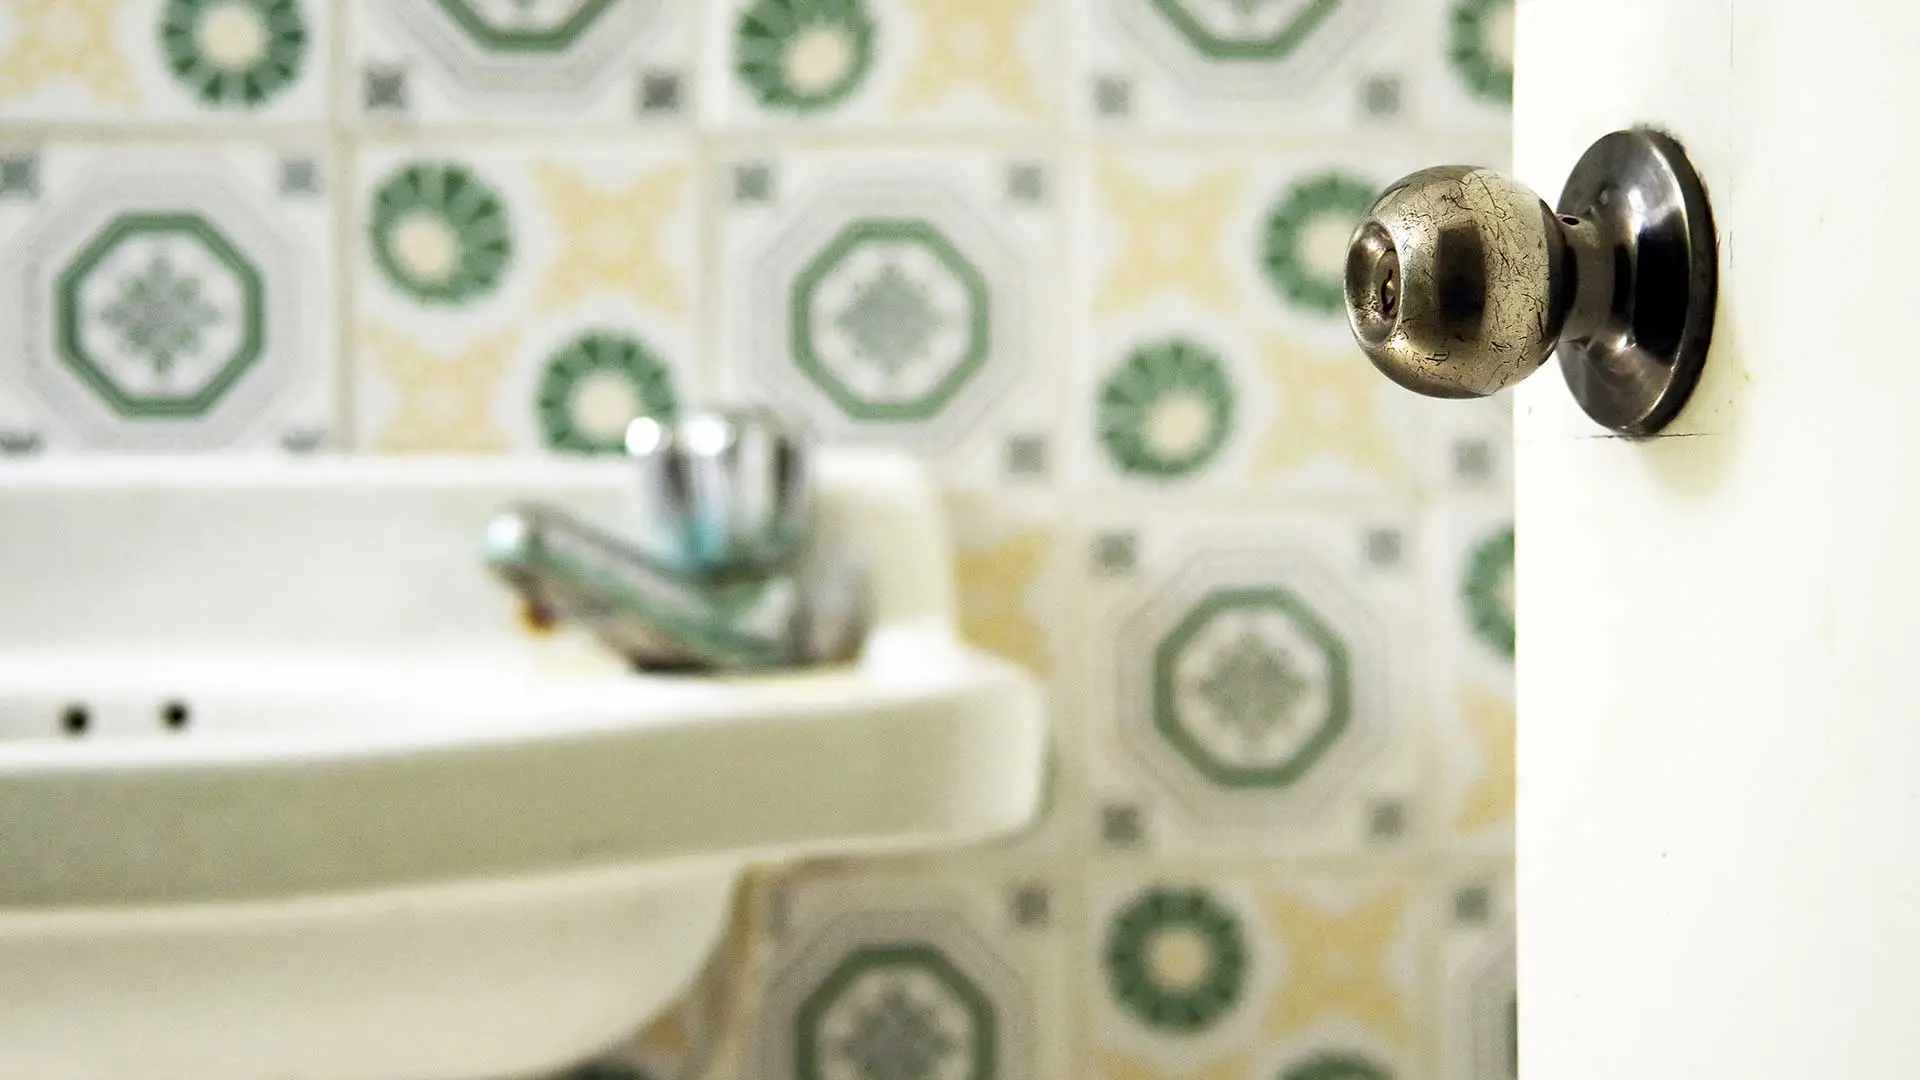 Signs That Your Bathroom Needs a Remodel